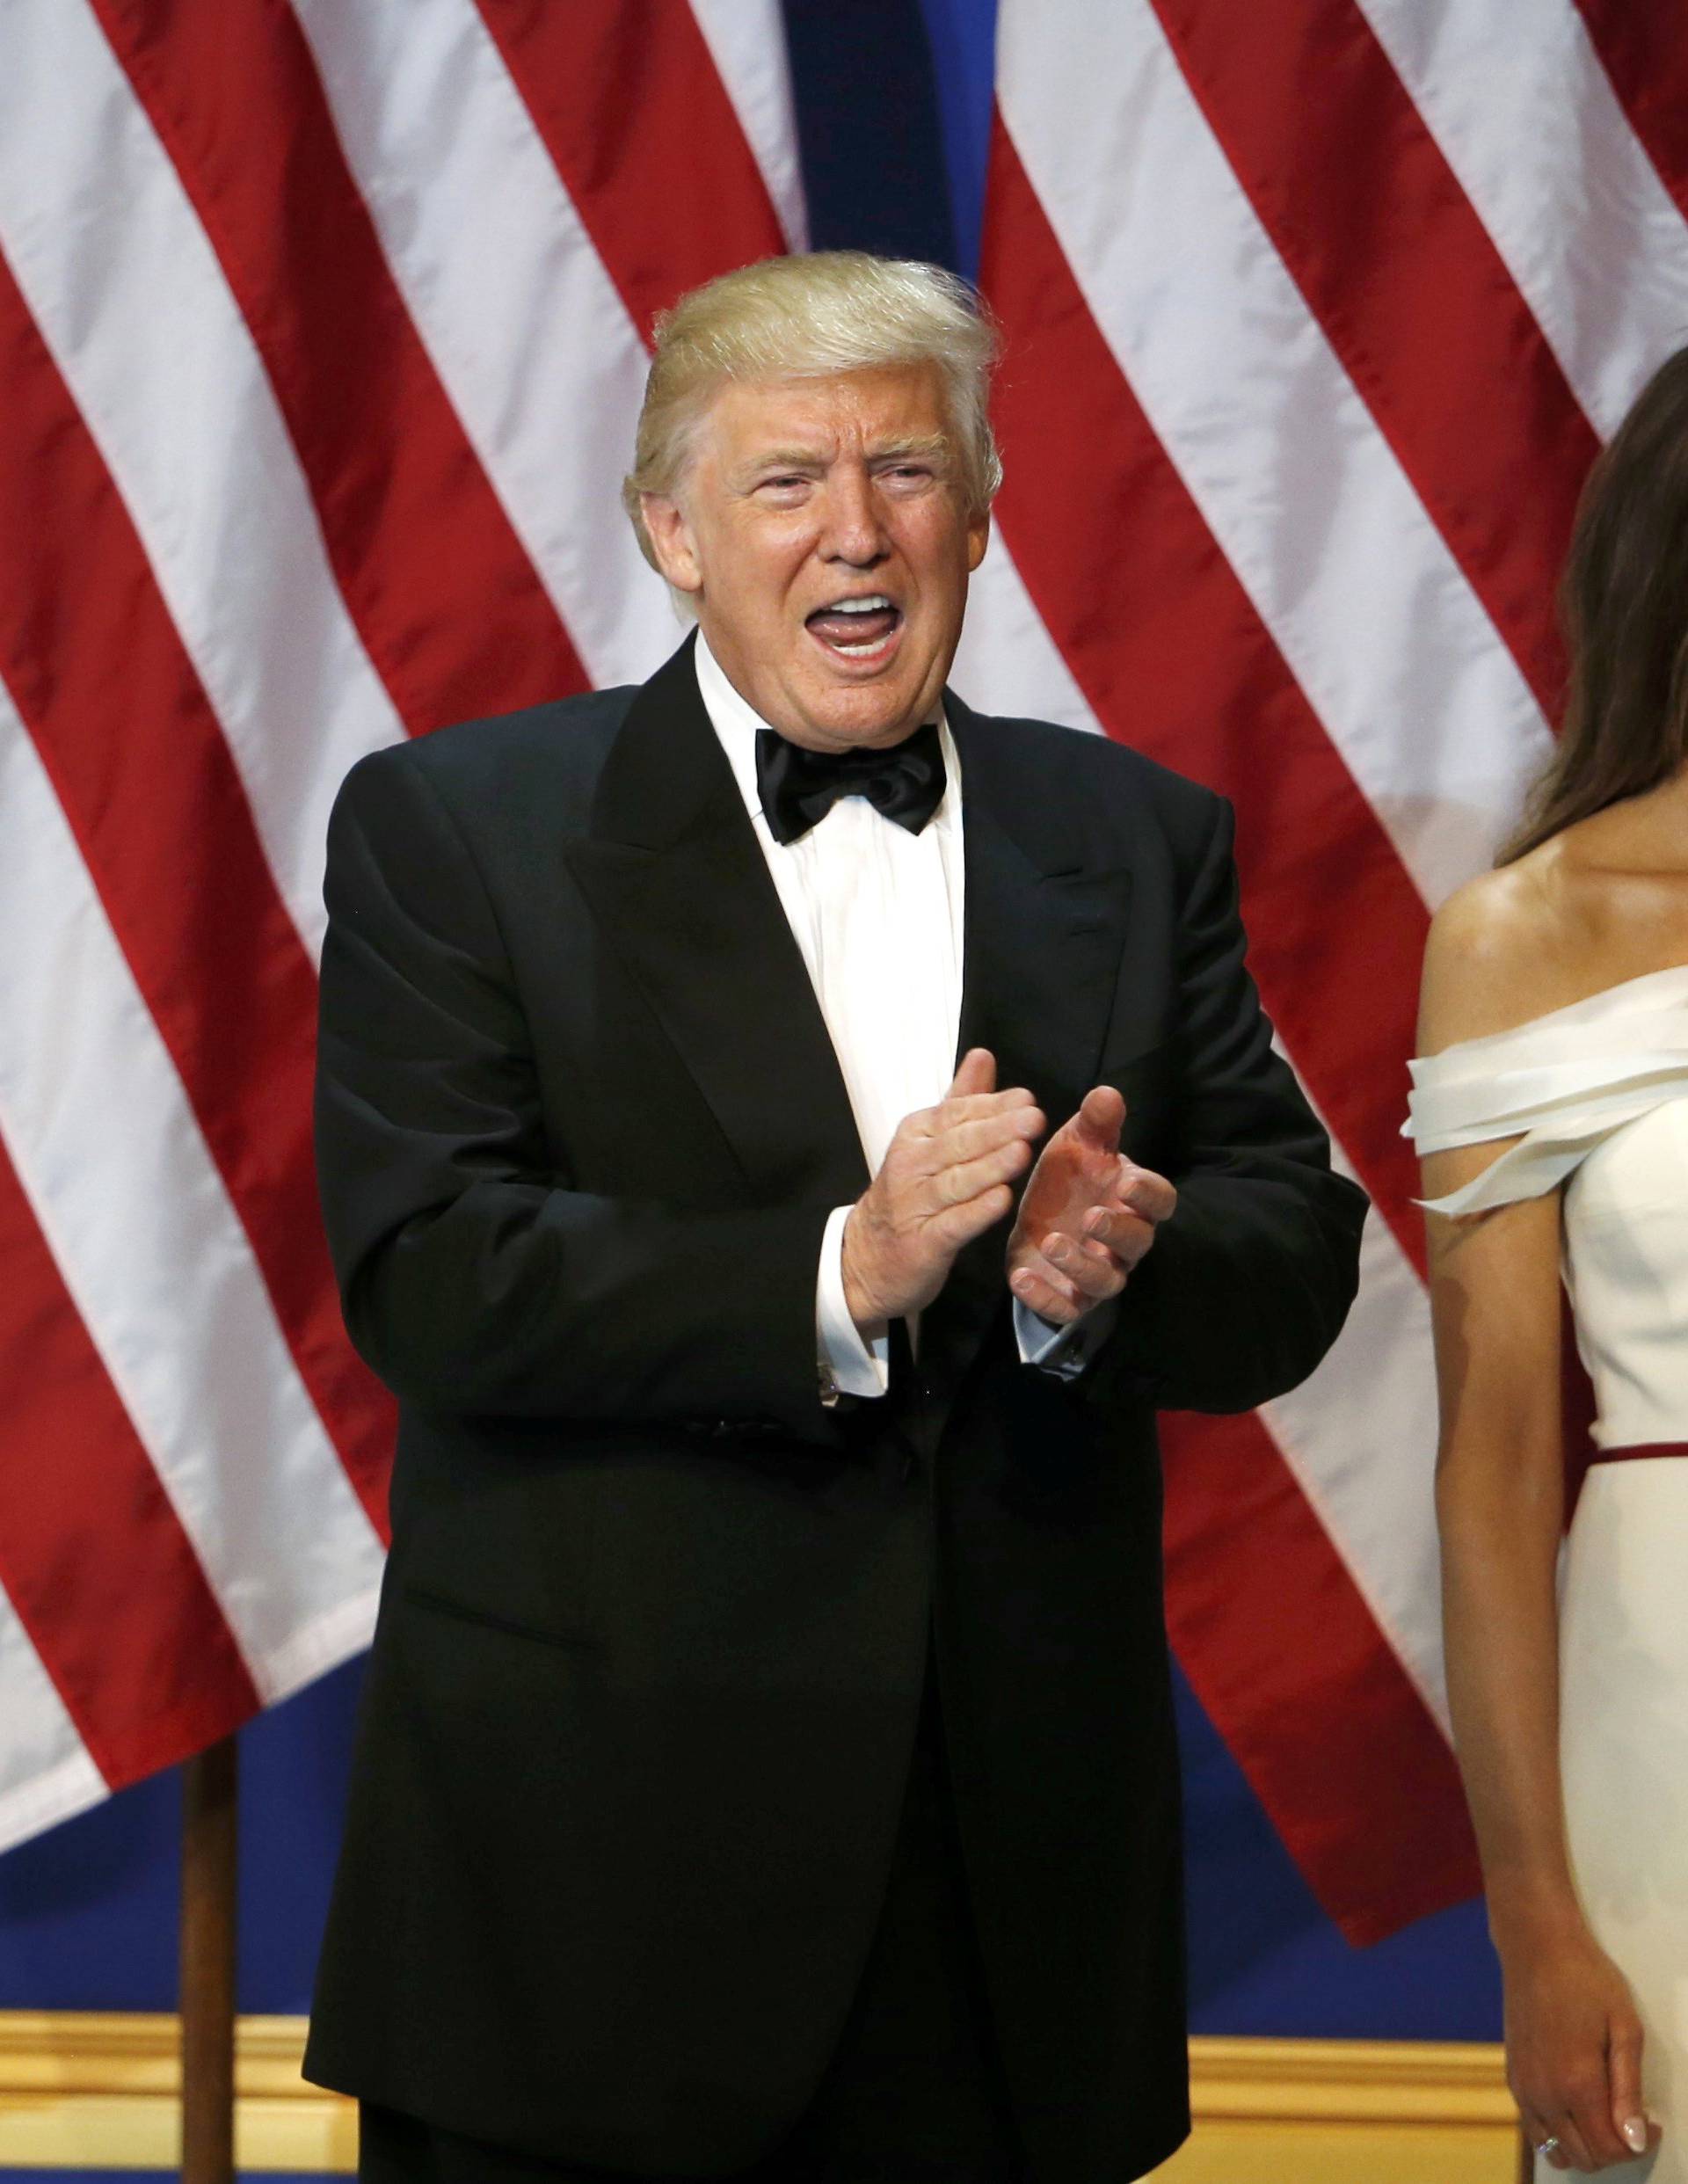 U.S. President Donald Trump and his wife first lady Melania Trump arrive at the "Salute to Our Armed Forces" inaugural ball during inauguration festivites in Washington